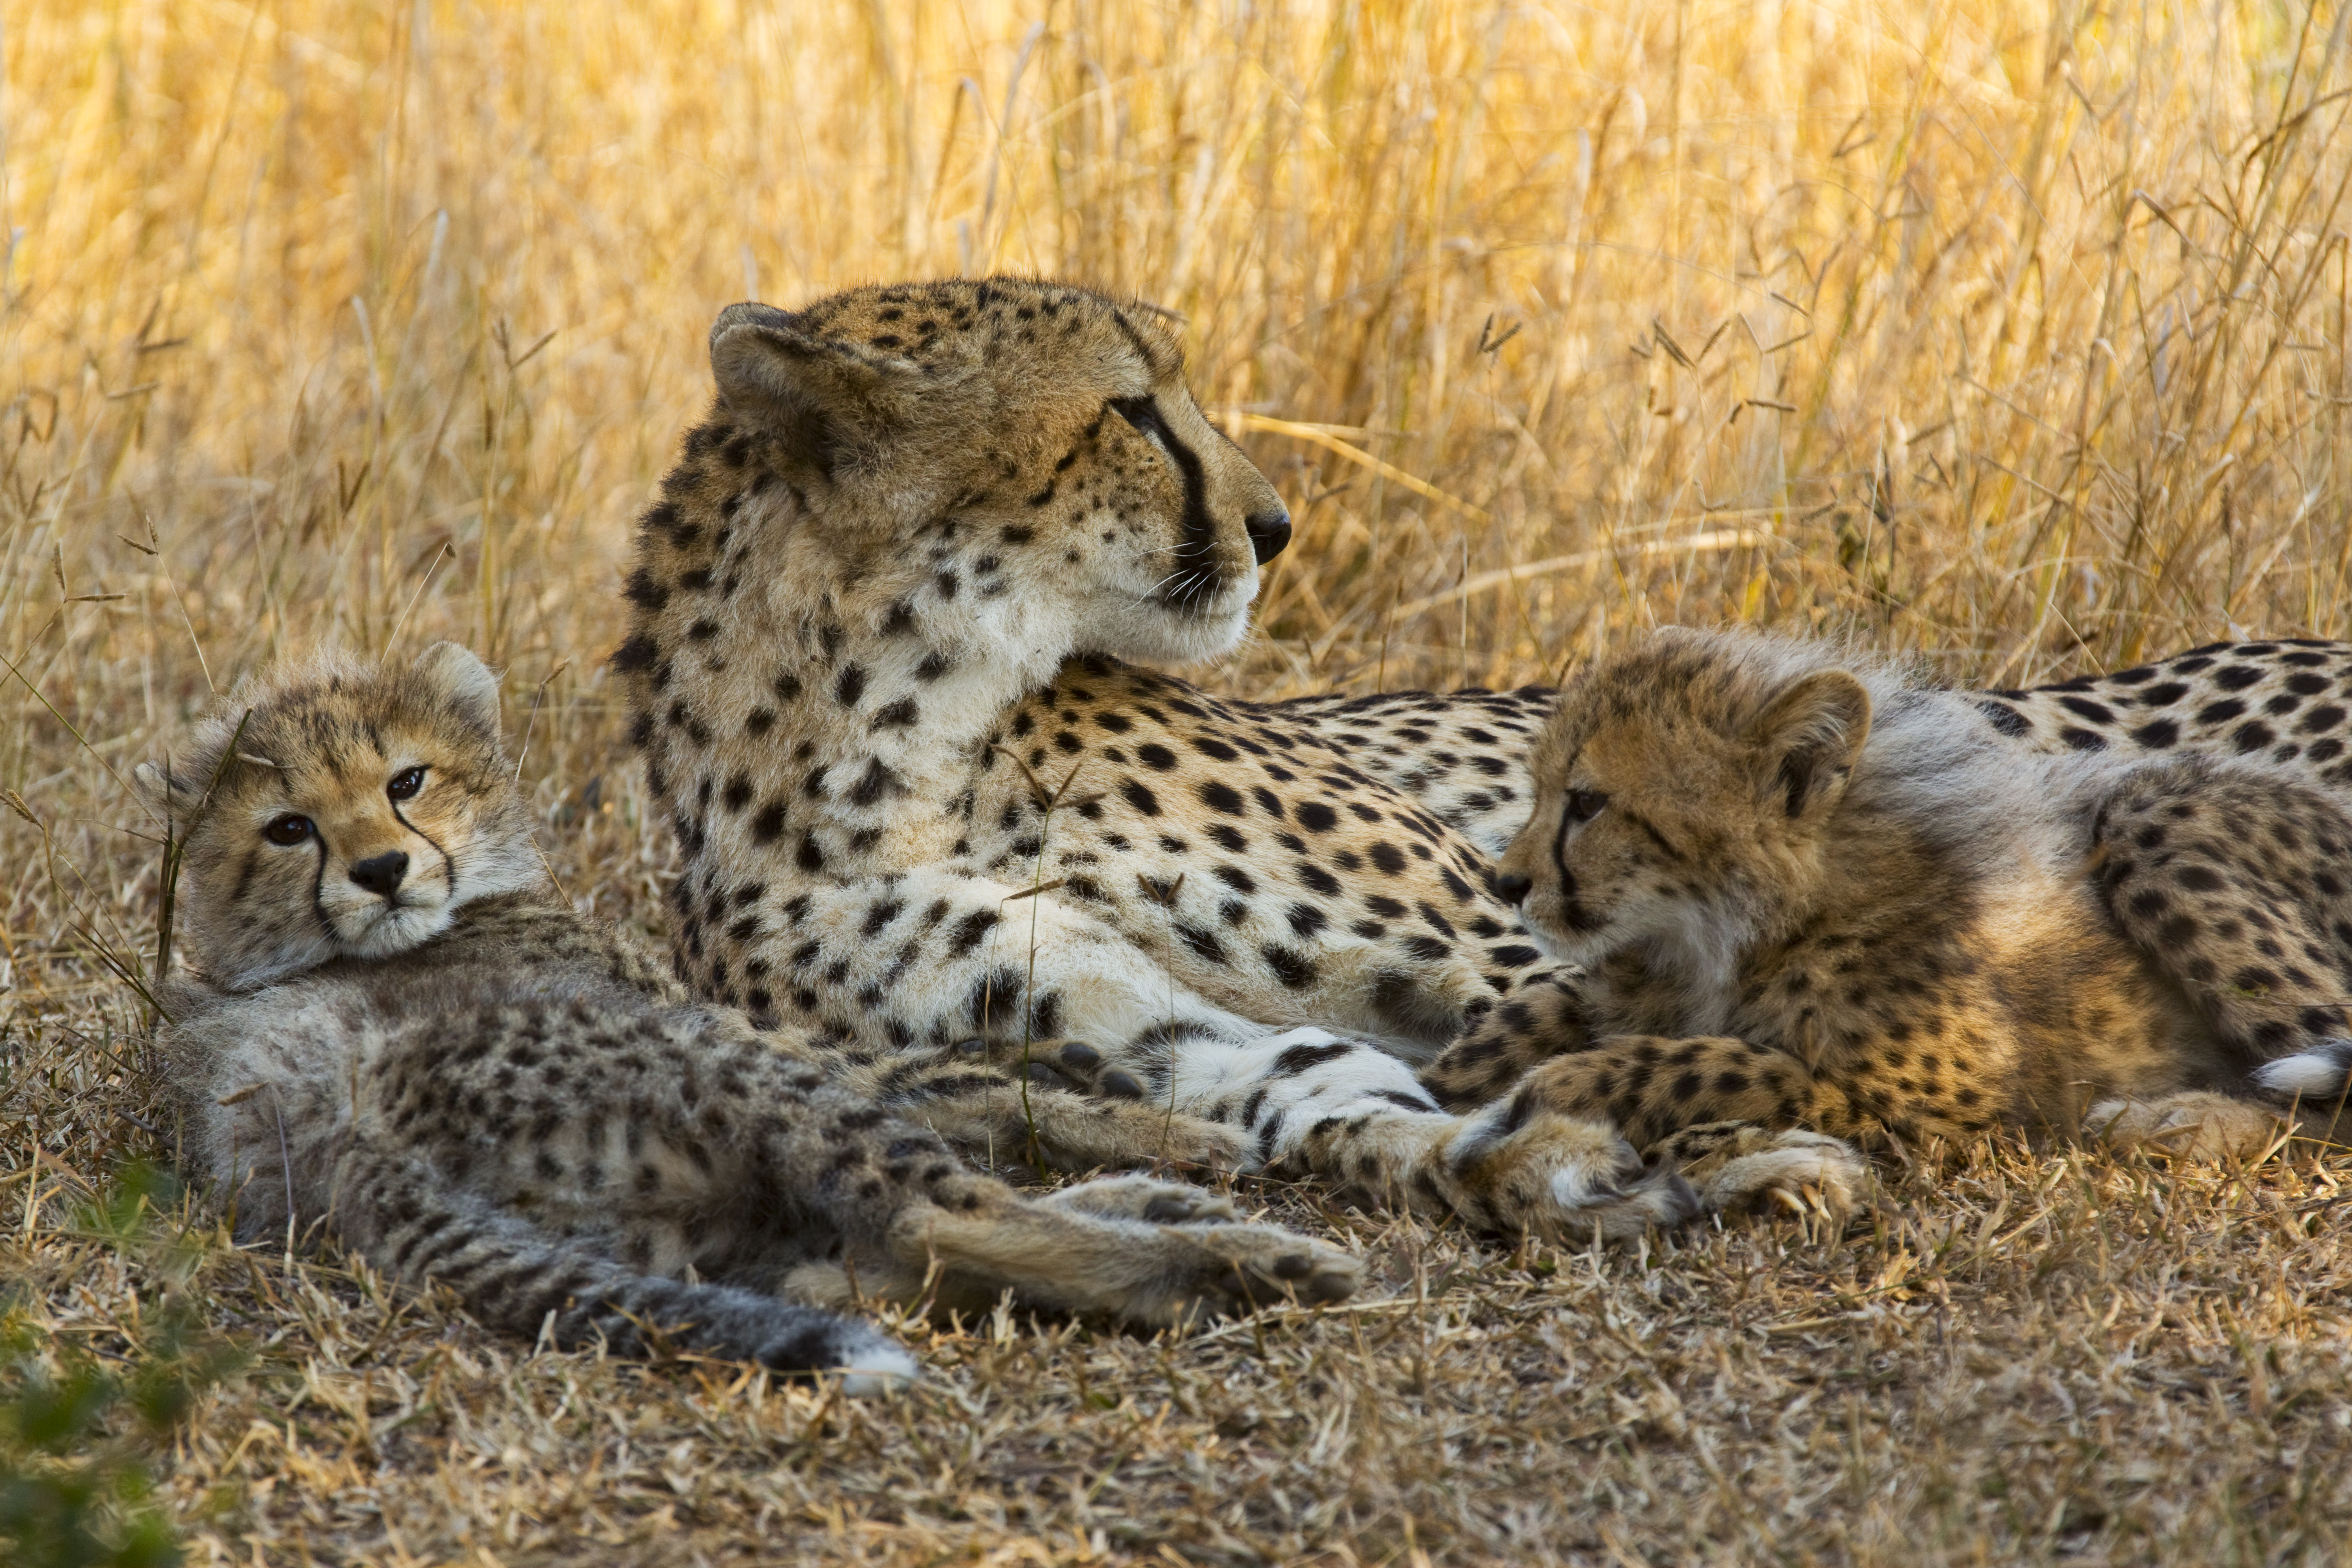 "Cheetah and her two cubs laying"